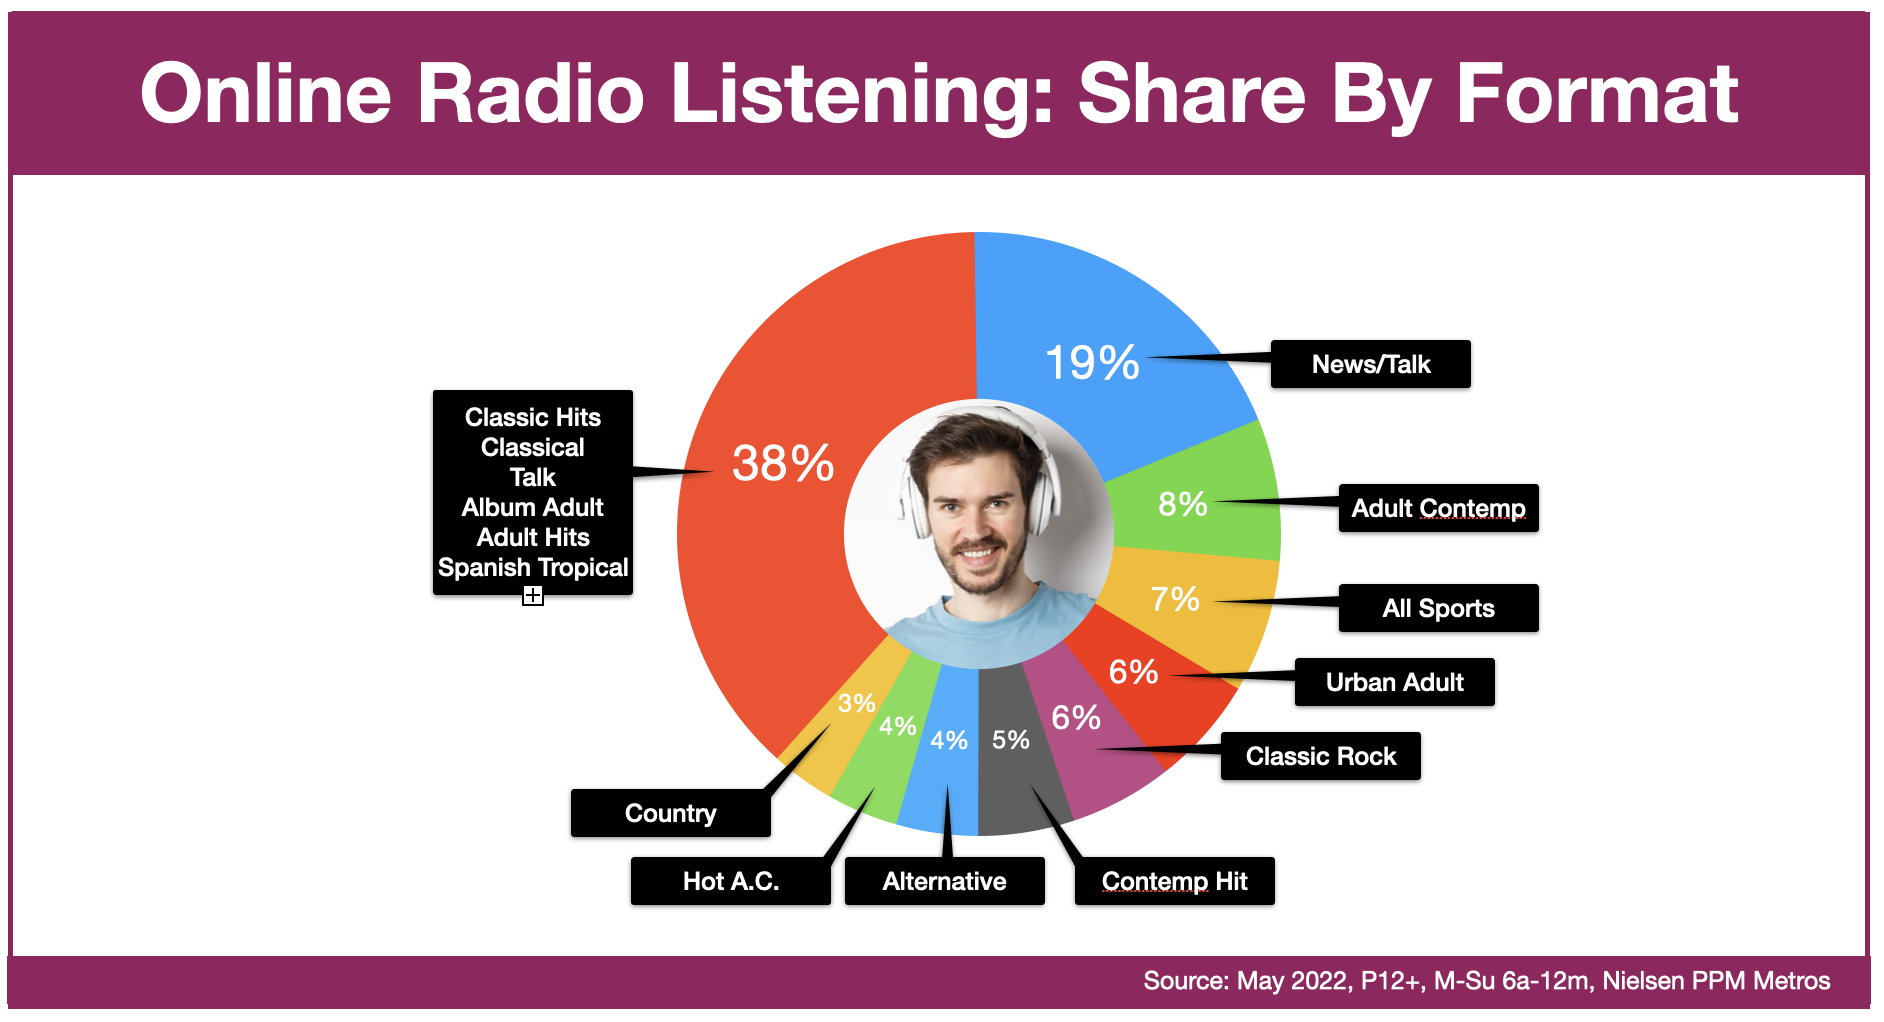 Advertise In Wilmington: Online Radio Listening By Format